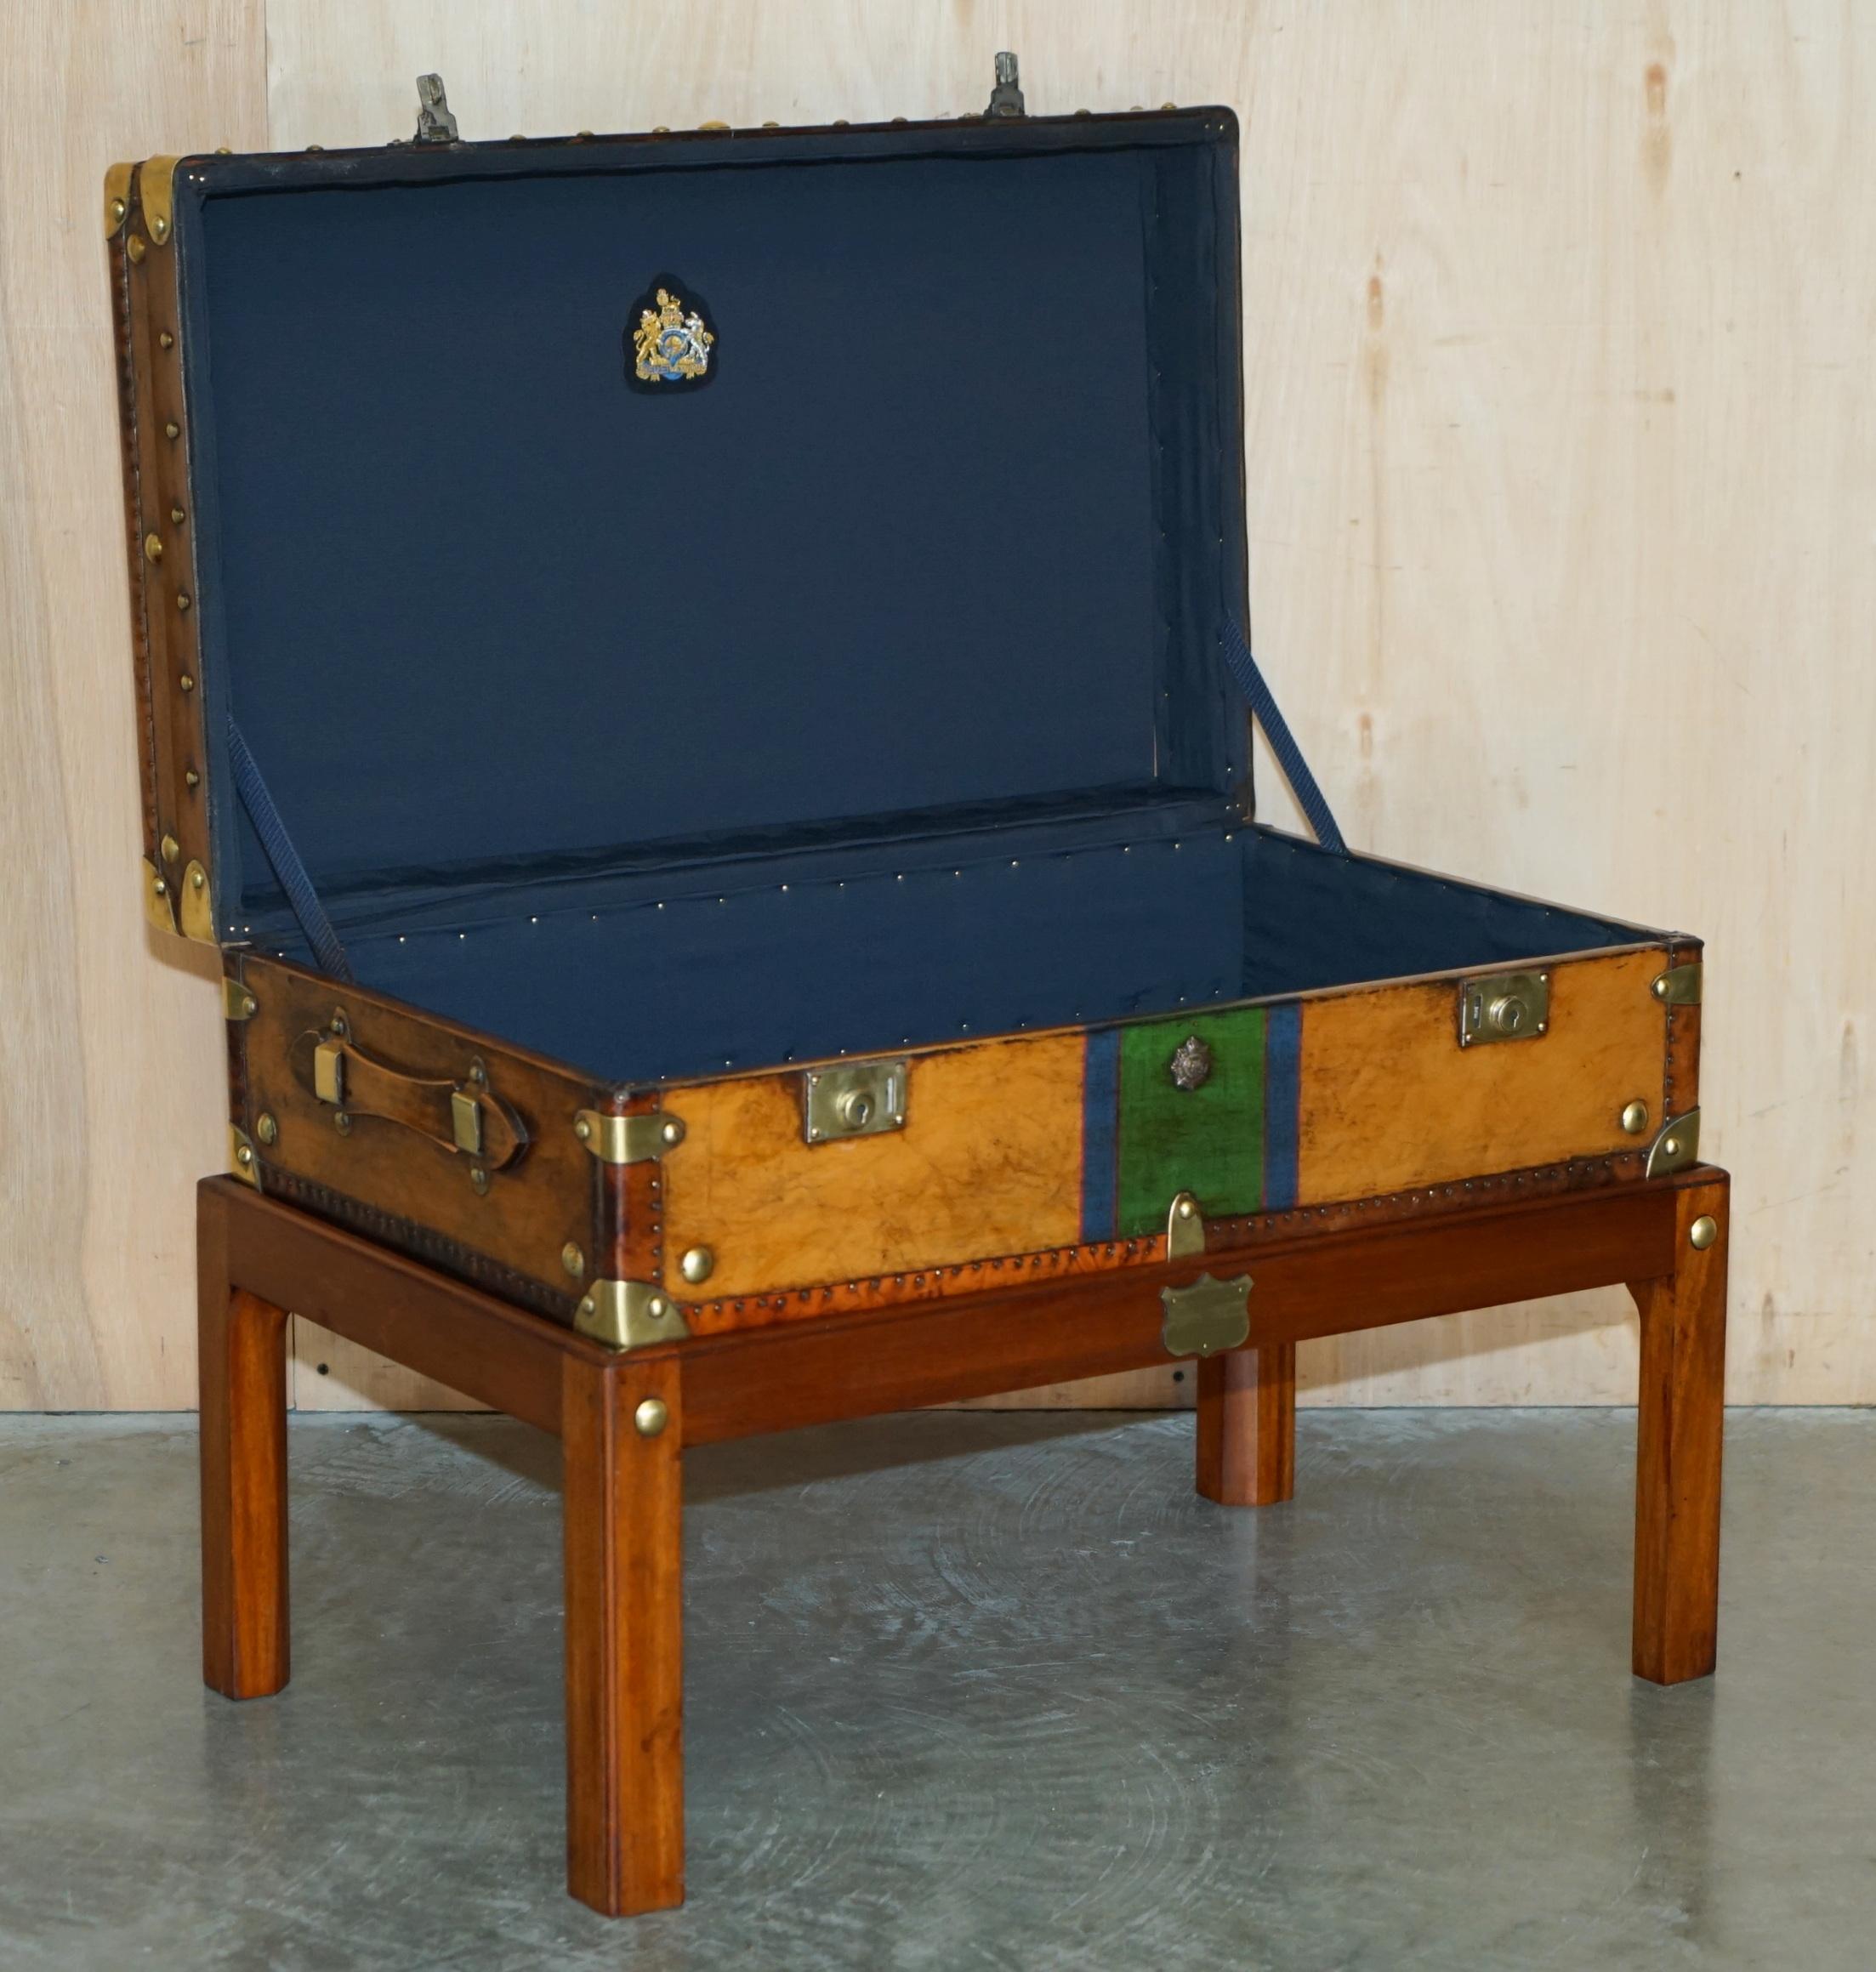 RESTORED BRITISH ARMY BROWN LEATHER TRUNK COFFEE TABLE HONI SOIT QUI MAL Y PENSe For Sale 13